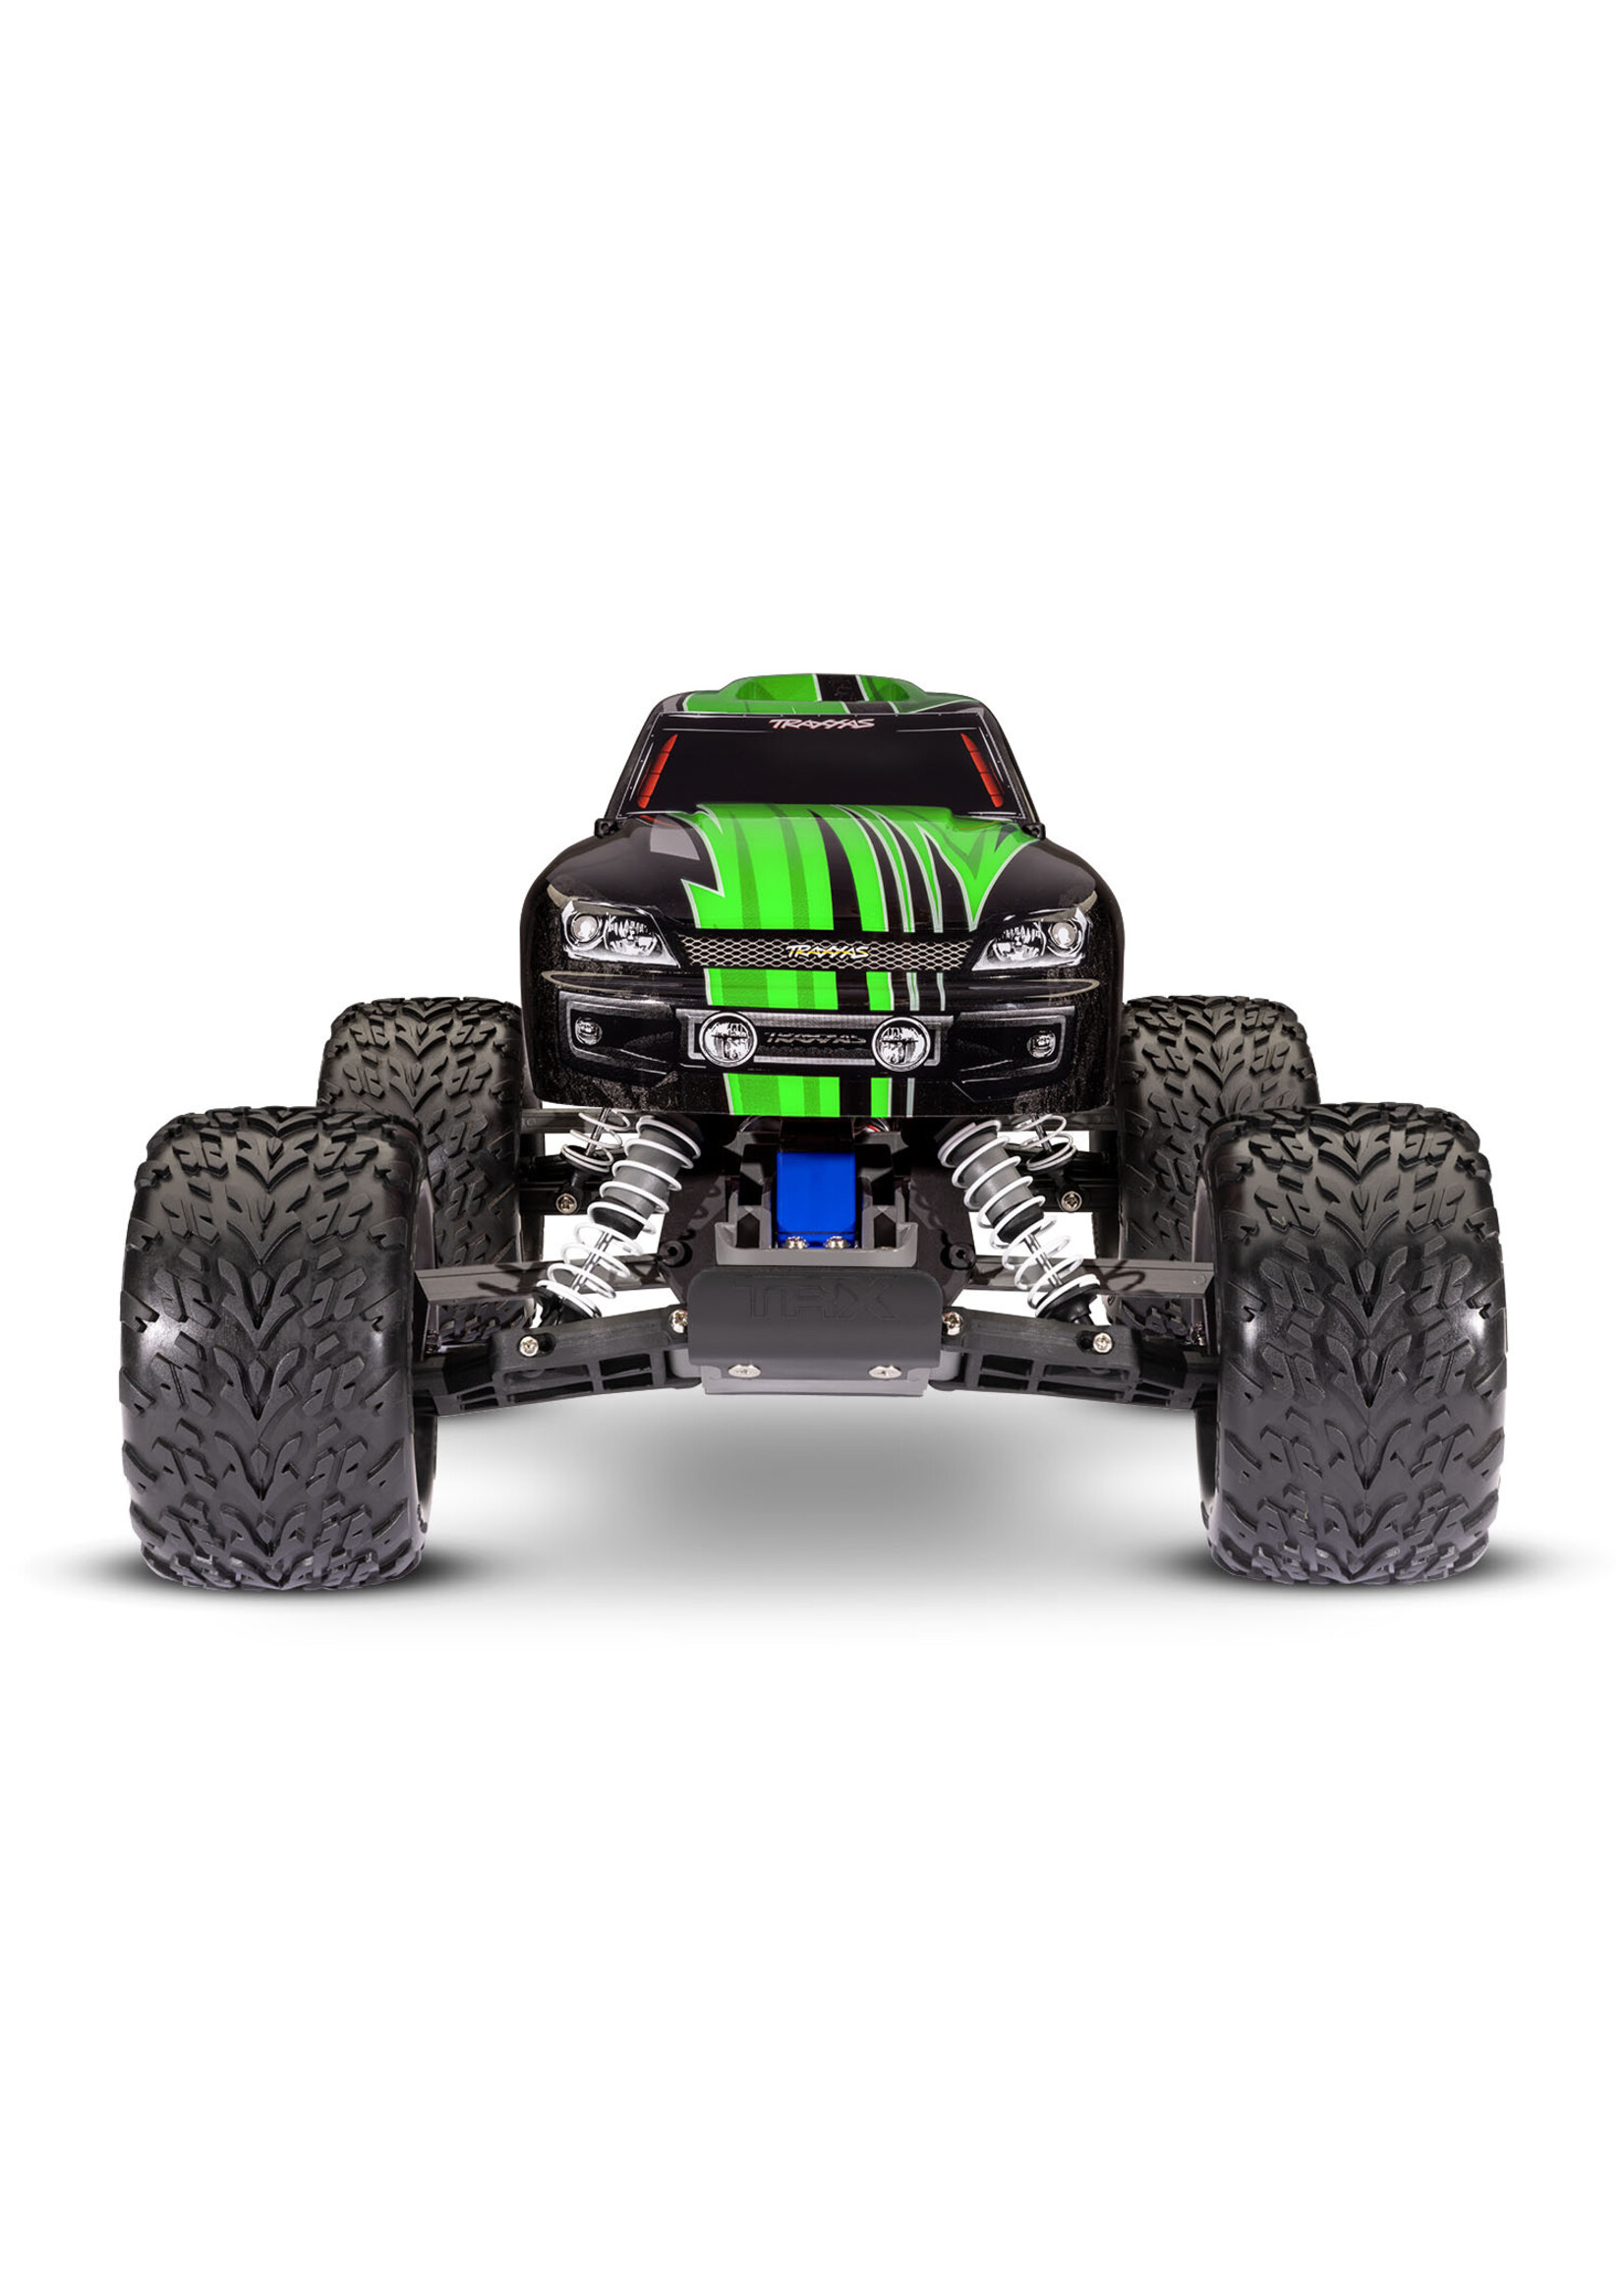 Traxxas 1/10 Stampede Monster Truck With USB-C Charger - Green